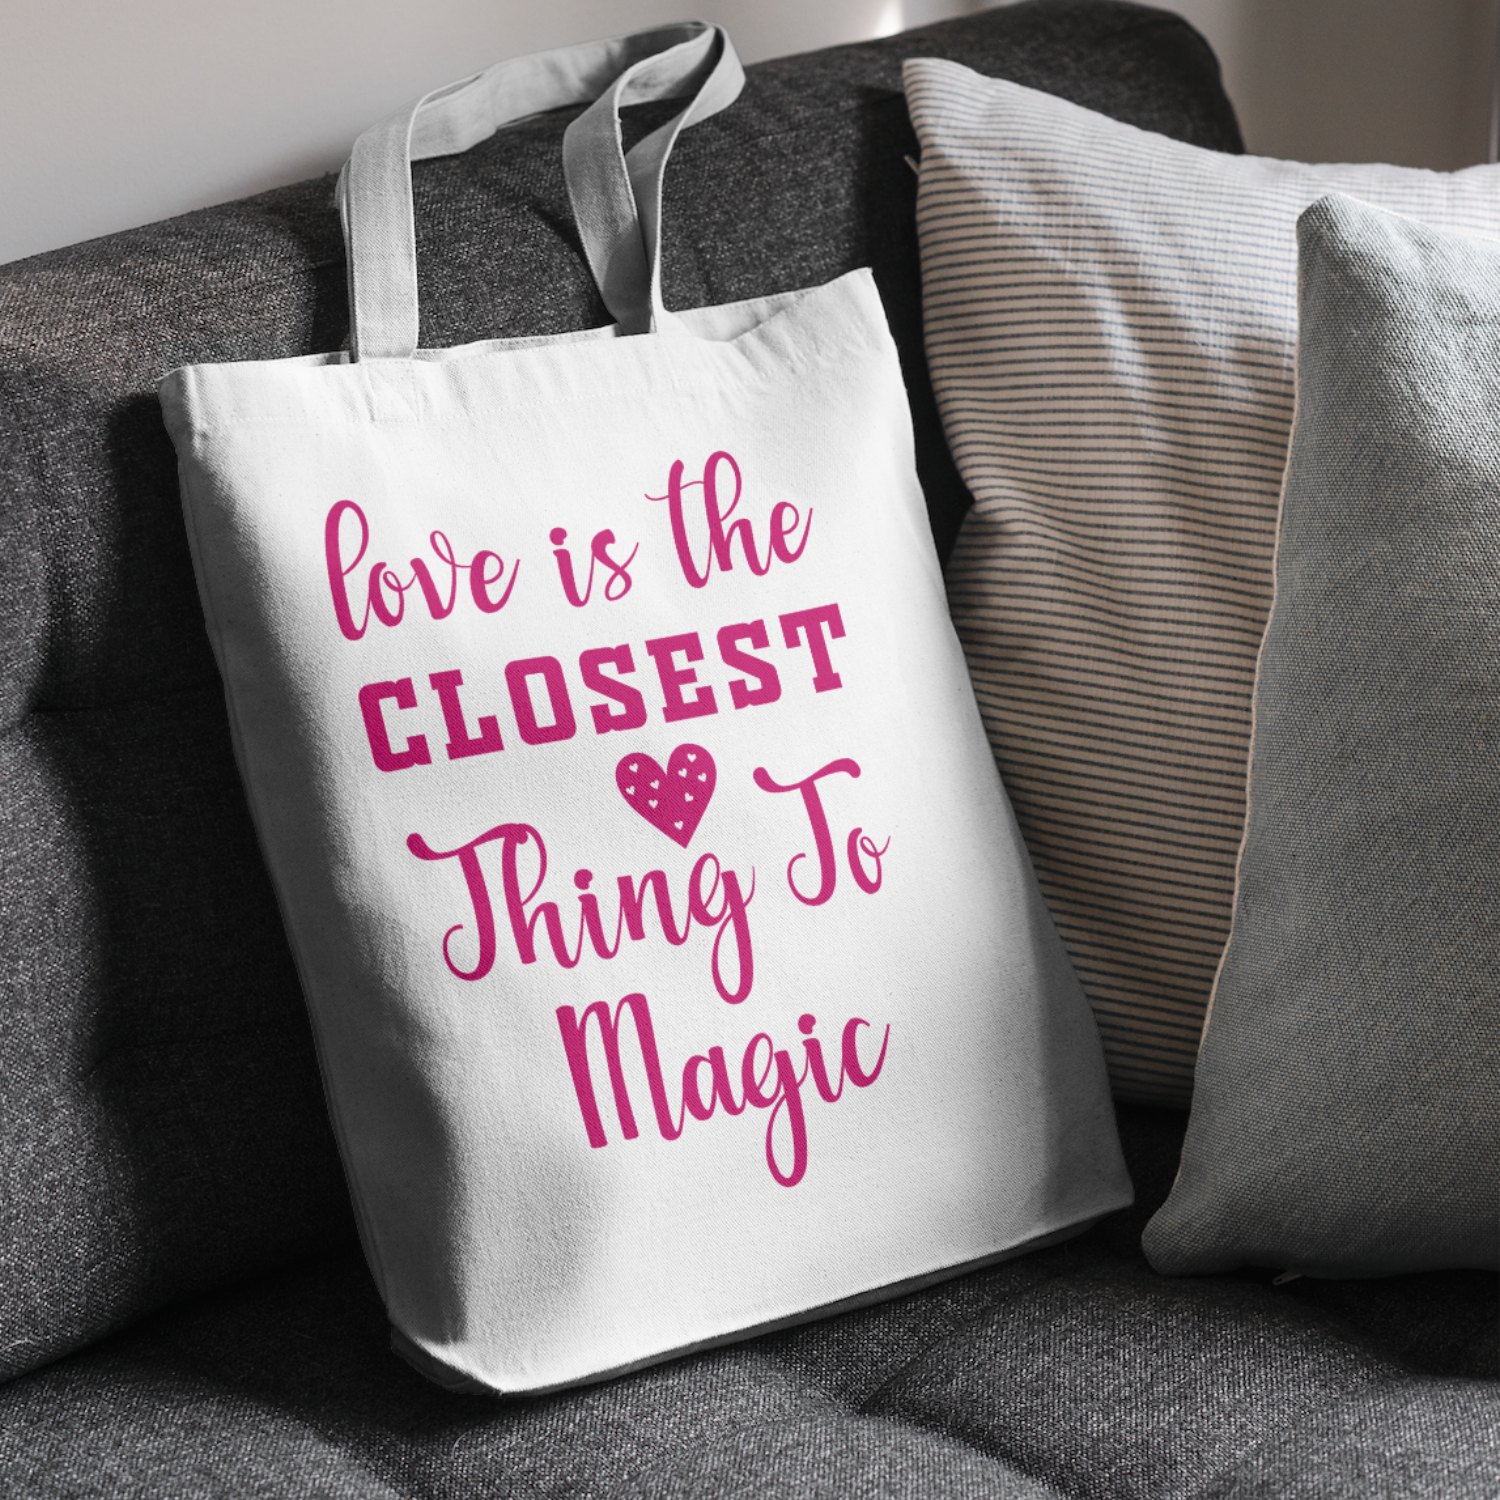 Love is the closest thing to magic SVG | Digital Download | Cut File | SVG Only The Sweet Stuff